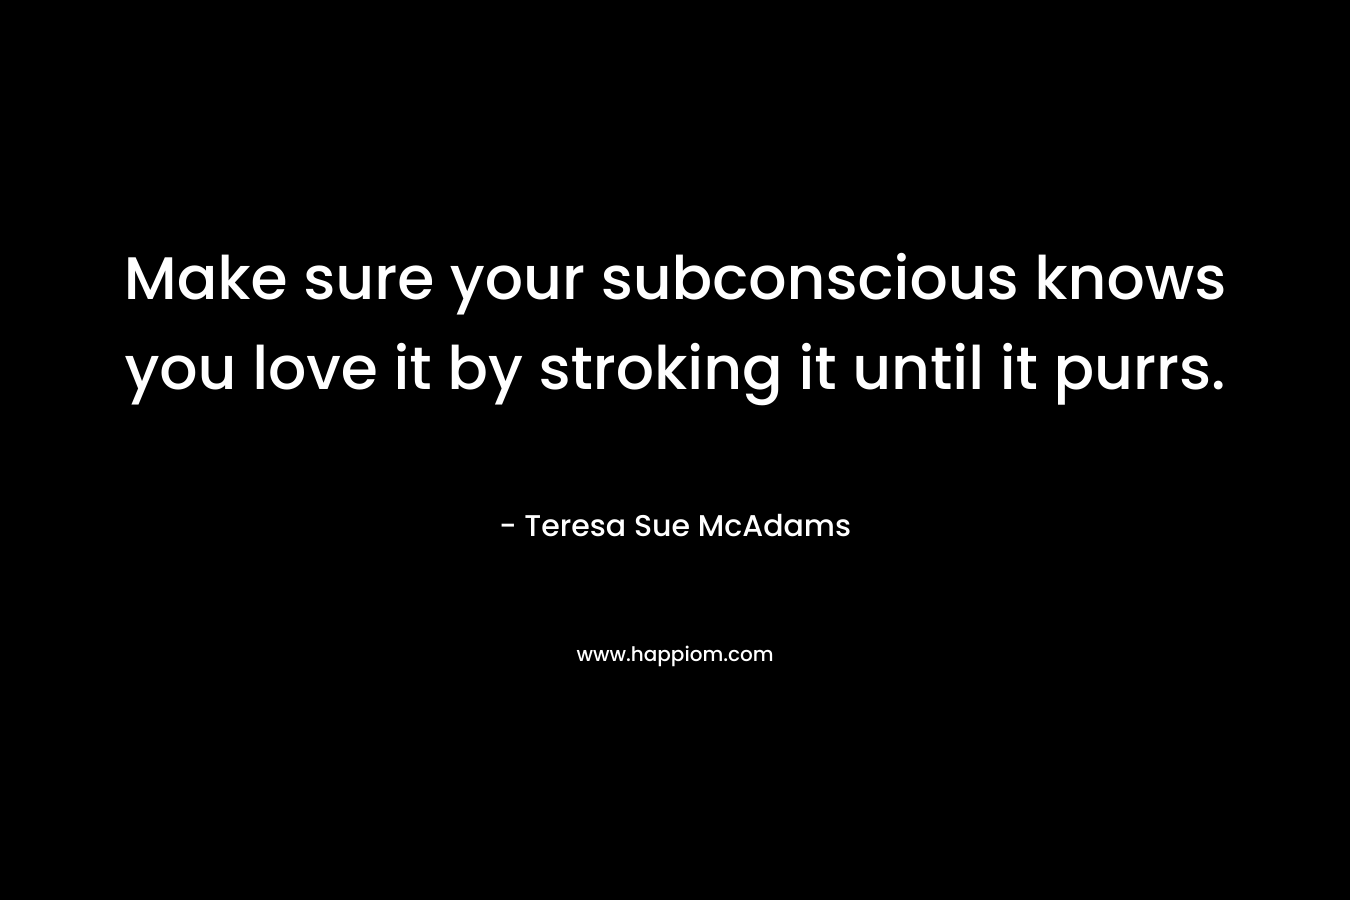 Make sure your subconscious knows you love it by stroking it until it purrs.